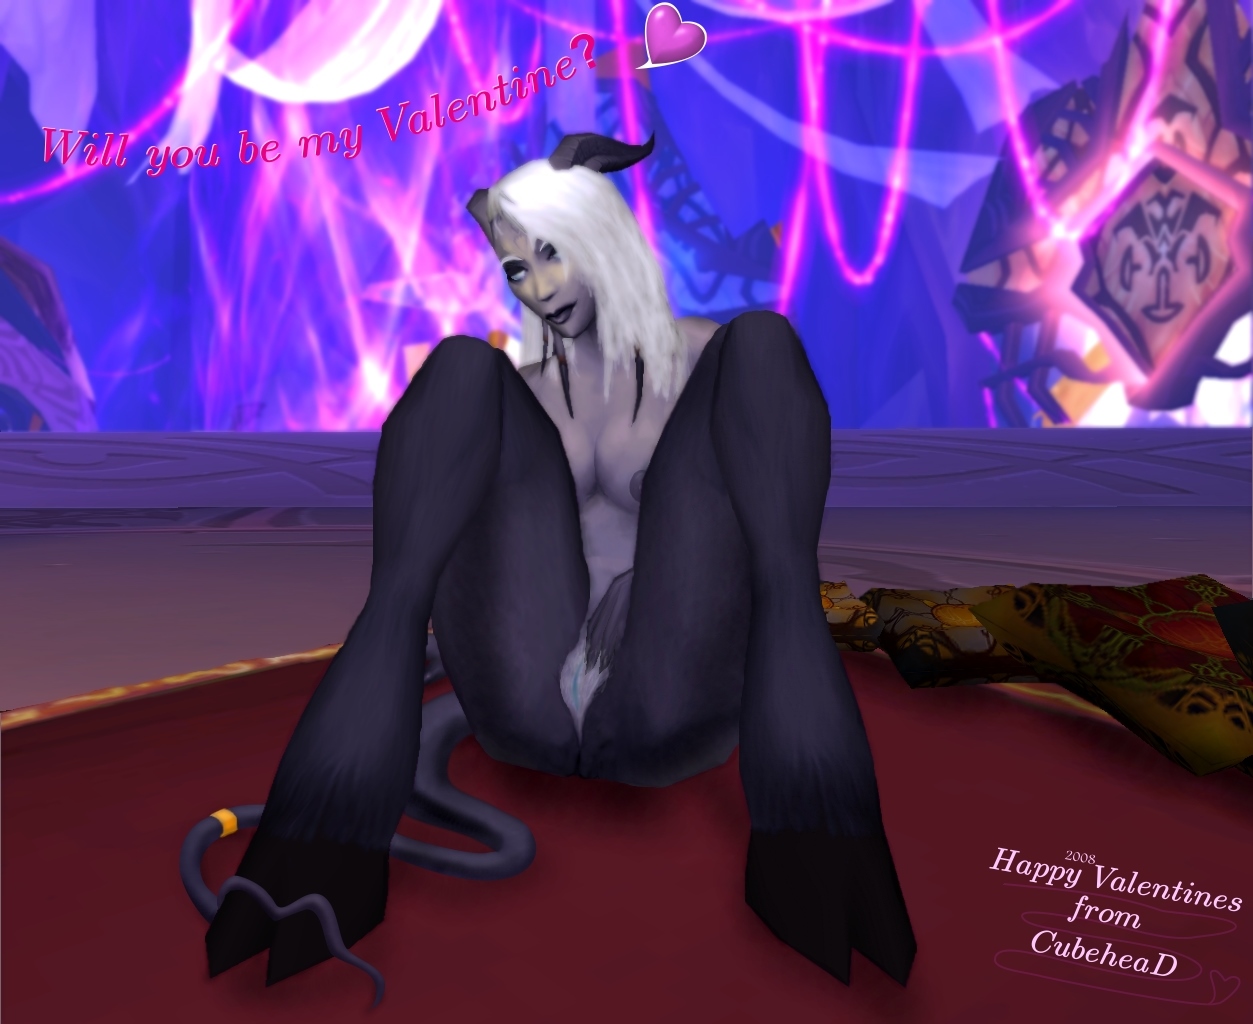 Happy Valentines 2008 [Draenei/Pinup]
2008 was not as good as 2009, although I was learning.
Keywords: Draenei;OC;pre2010;pinup